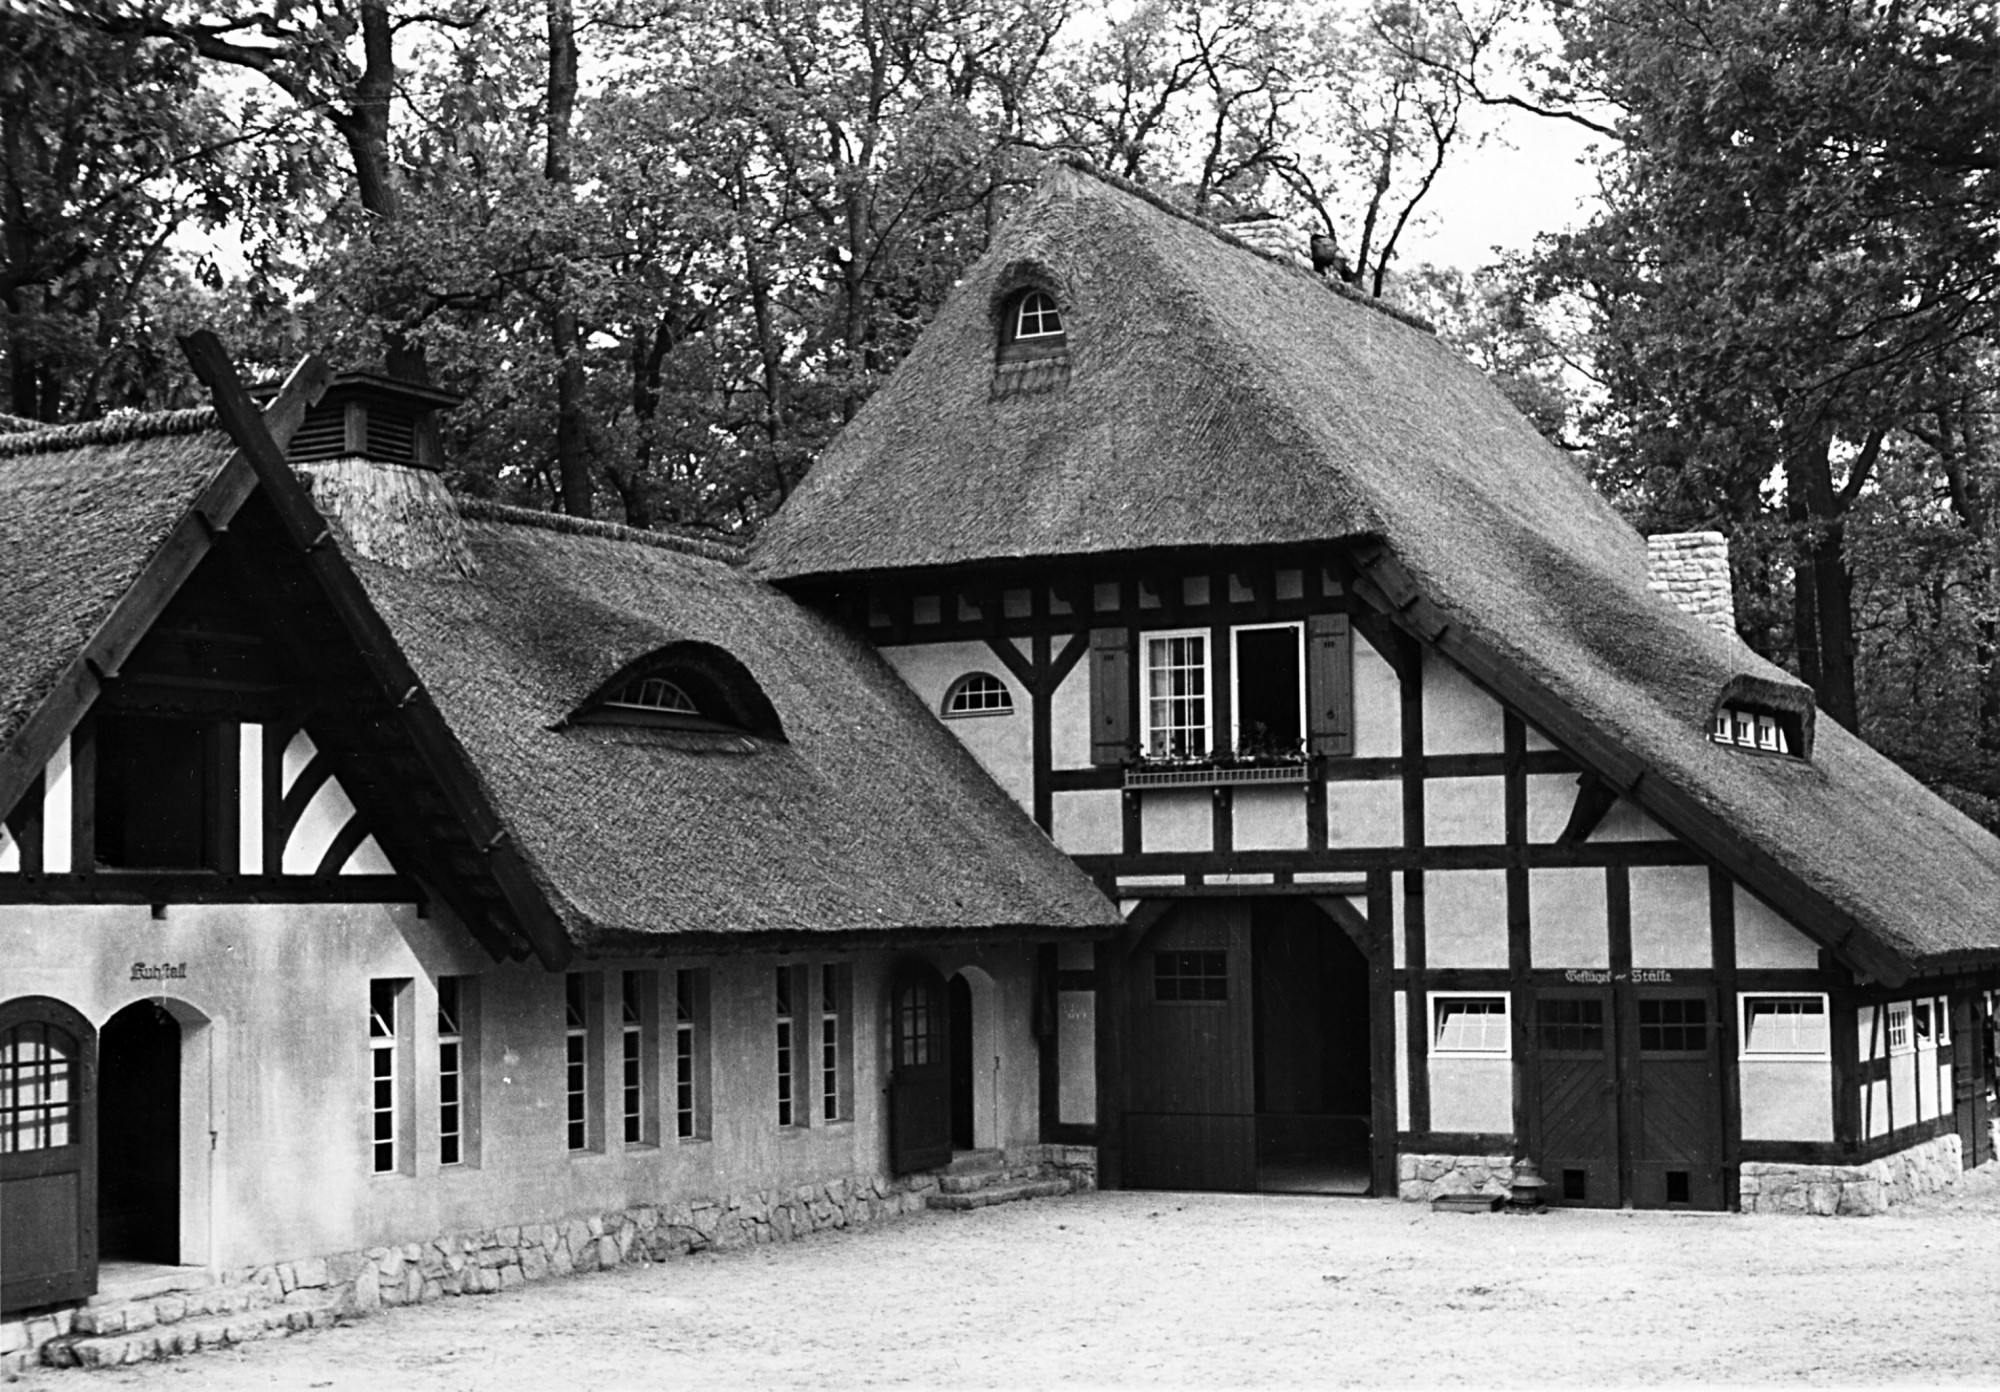 Black and white photograph: Replica of farmhouse with thatched roof